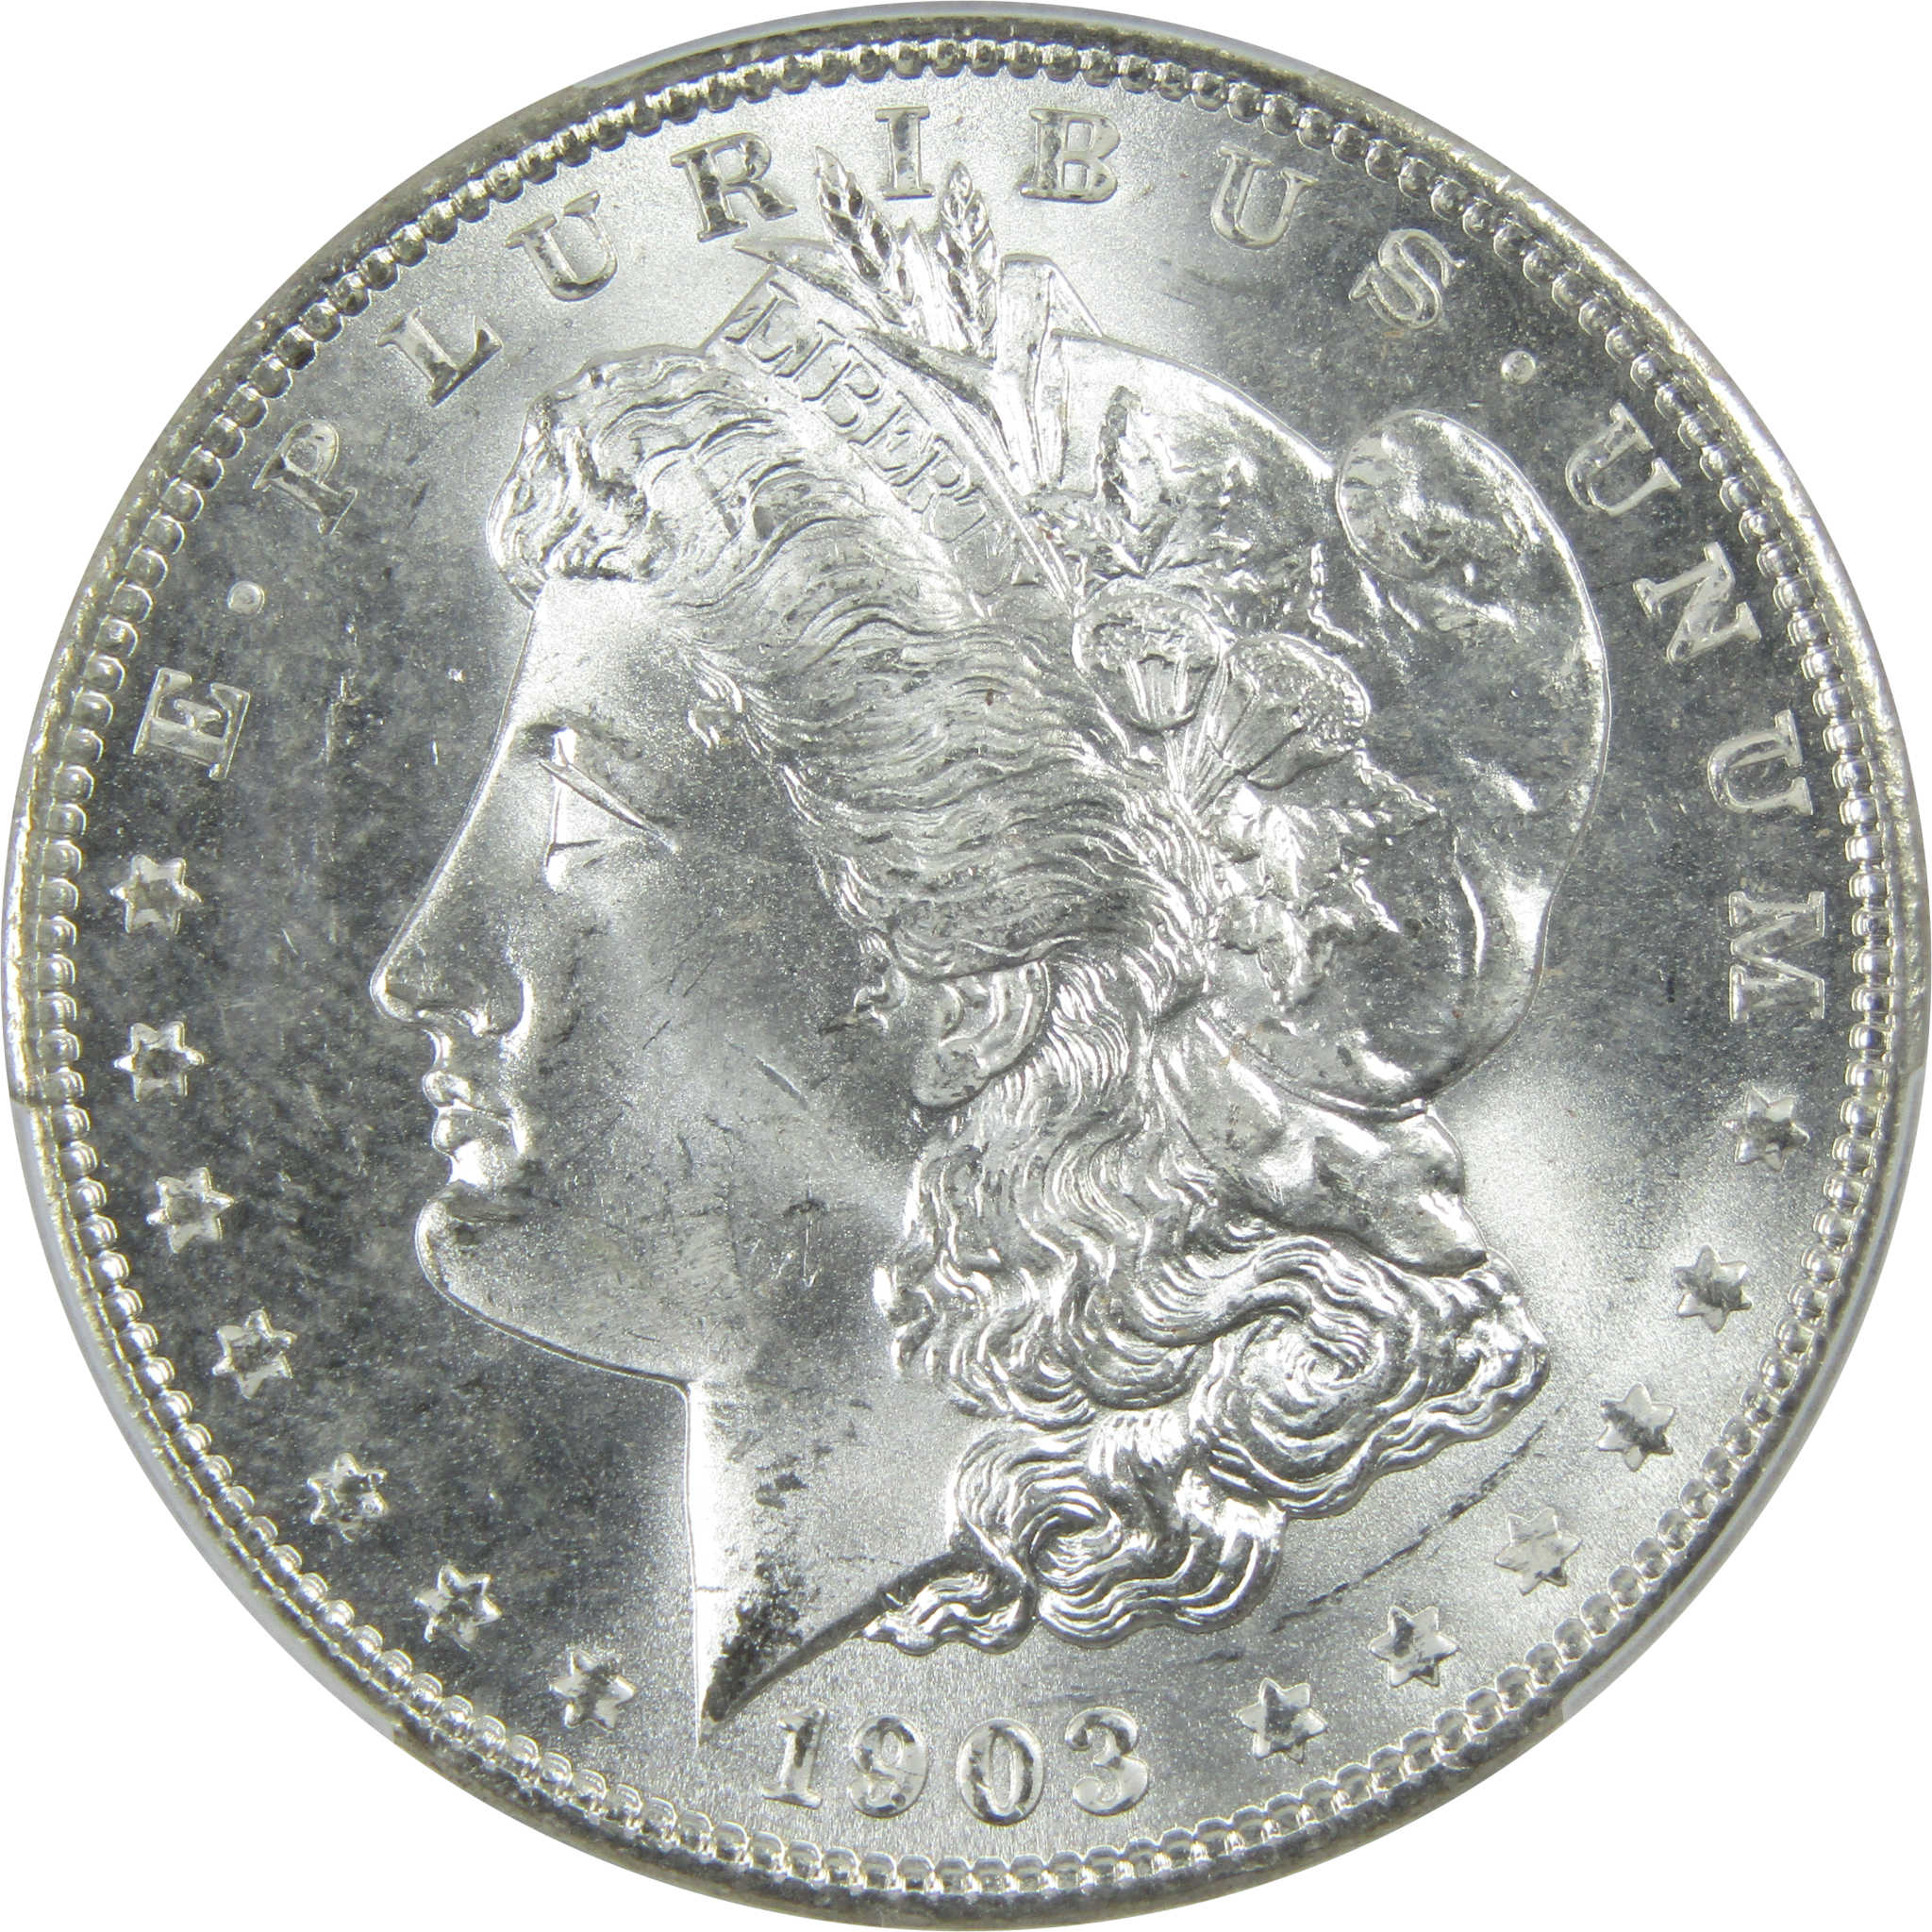 1903 O Morgan Dollar MS 64 PCGS Silver $1 Uncirculated Coin SKU:I13391 - Morgan coin - Morgan silver dollar - Morgan silver dollar for sale - Profile Coins &amp; Collectibles